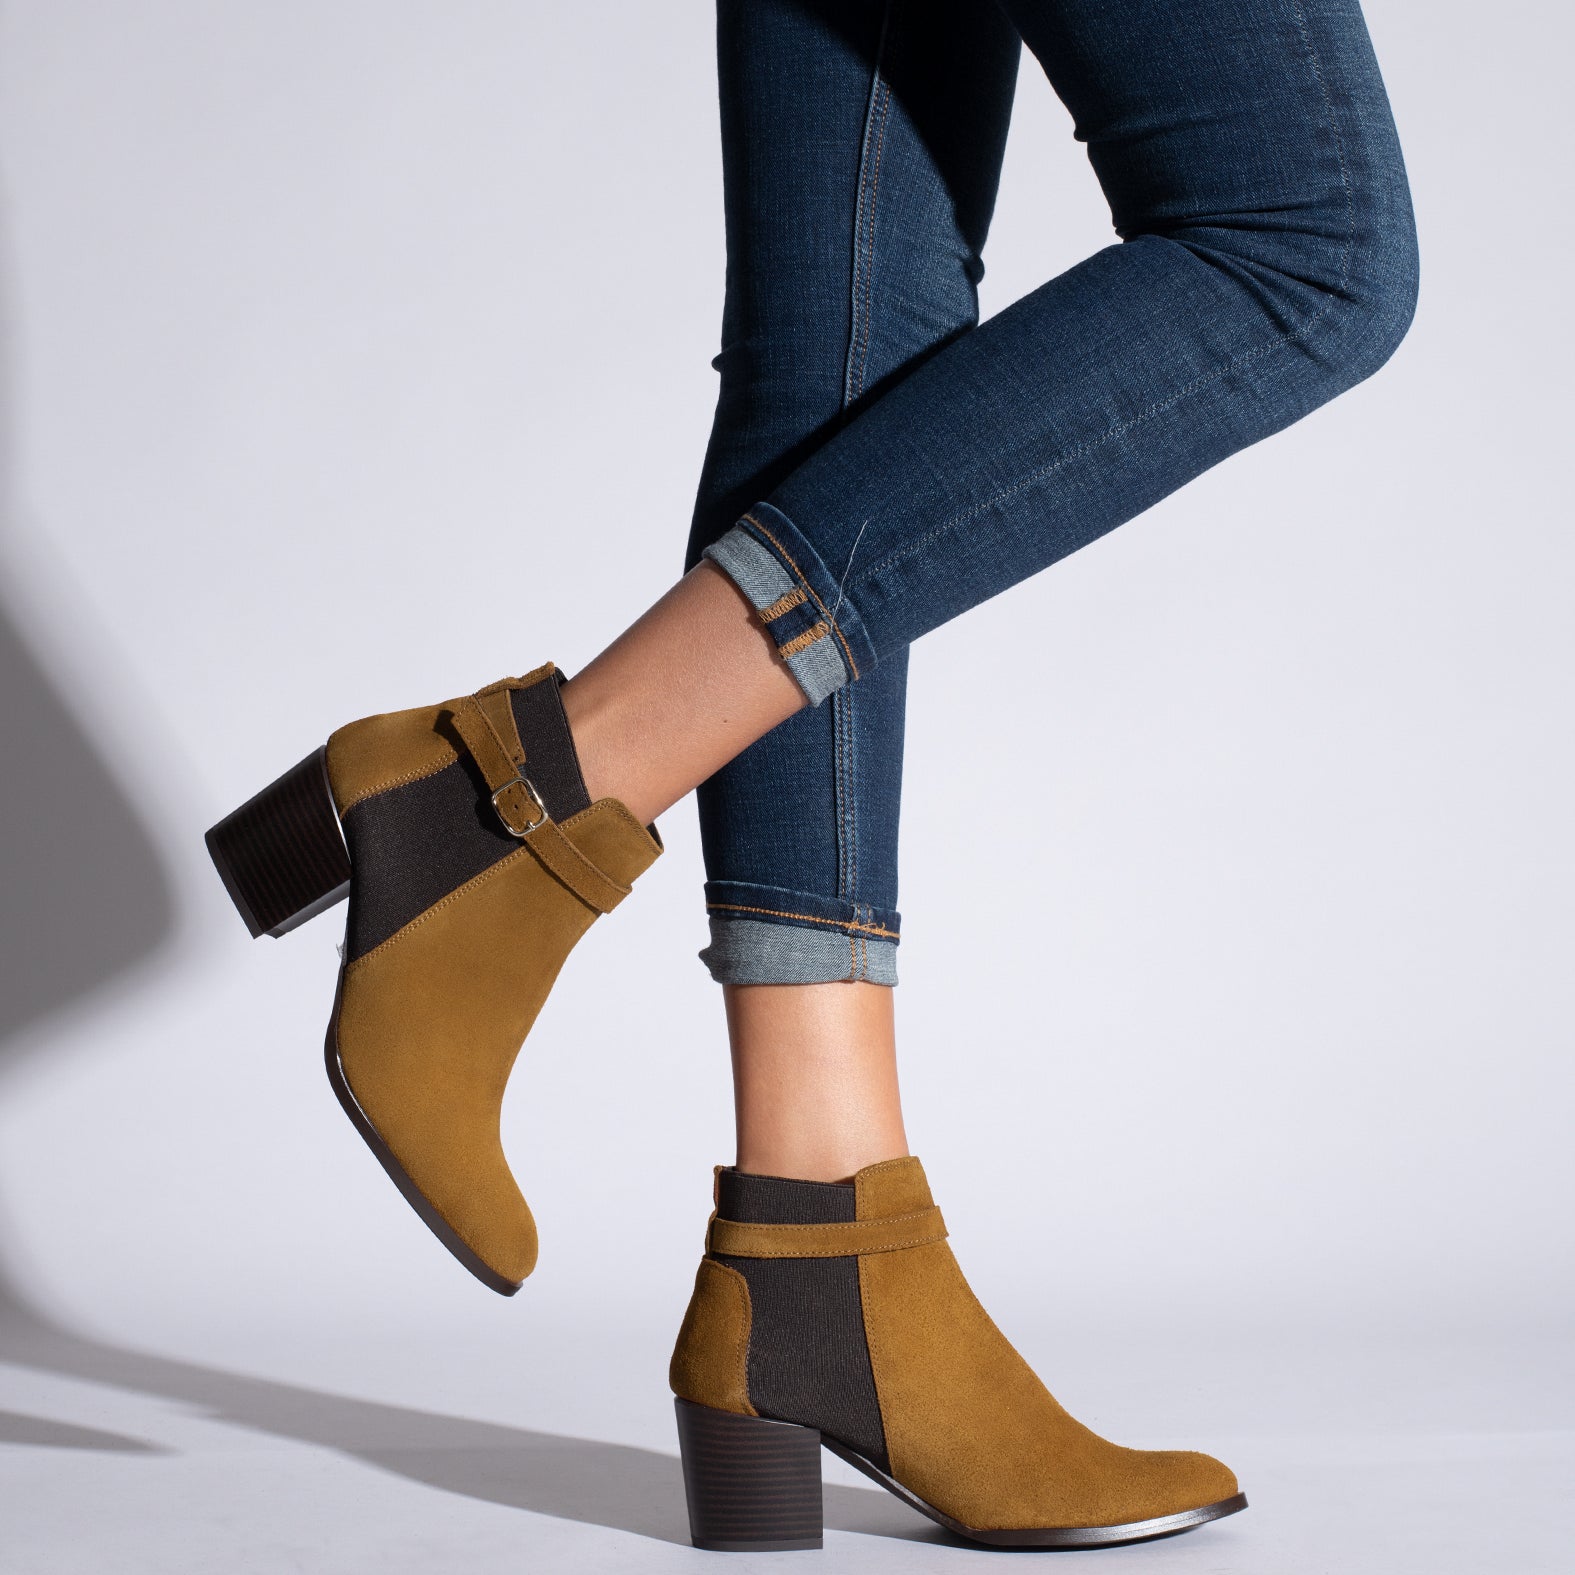 ELASTIC – CAMEL bootie with elastic side bands